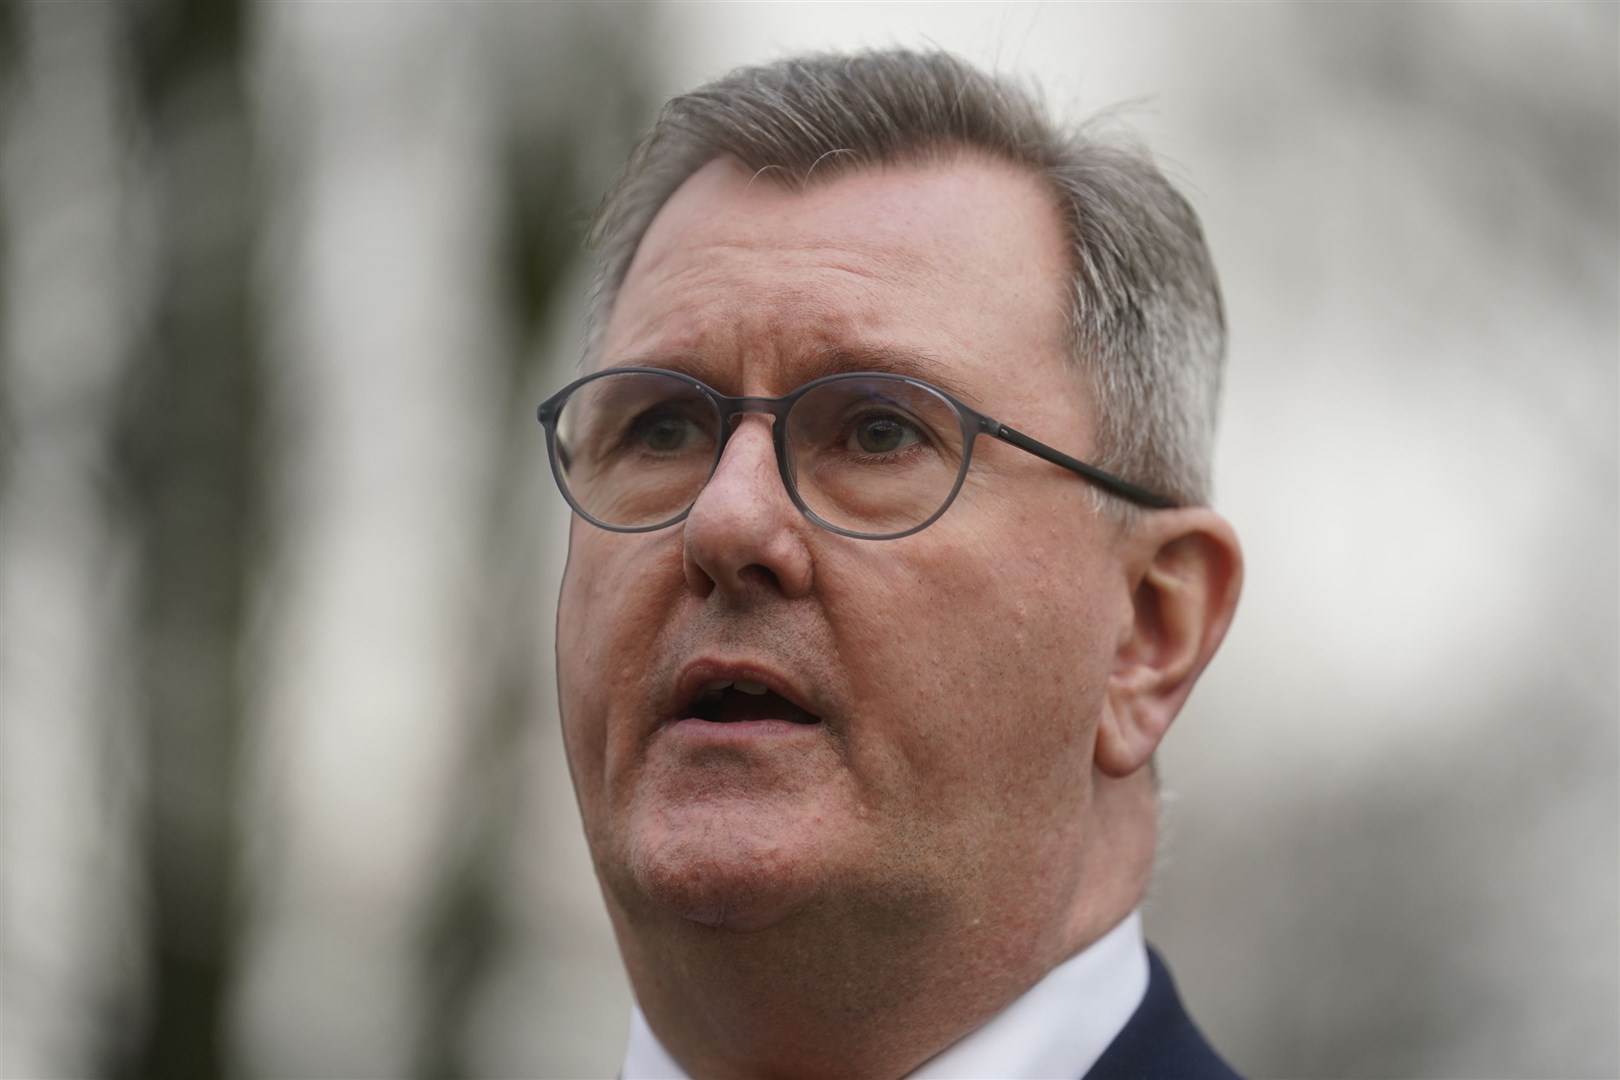 DUP leader Sir Jeffrey Donaldson said his party would not back the election of a Stormont speaker, meaning no further business can take place (Brian Lawless/PA)